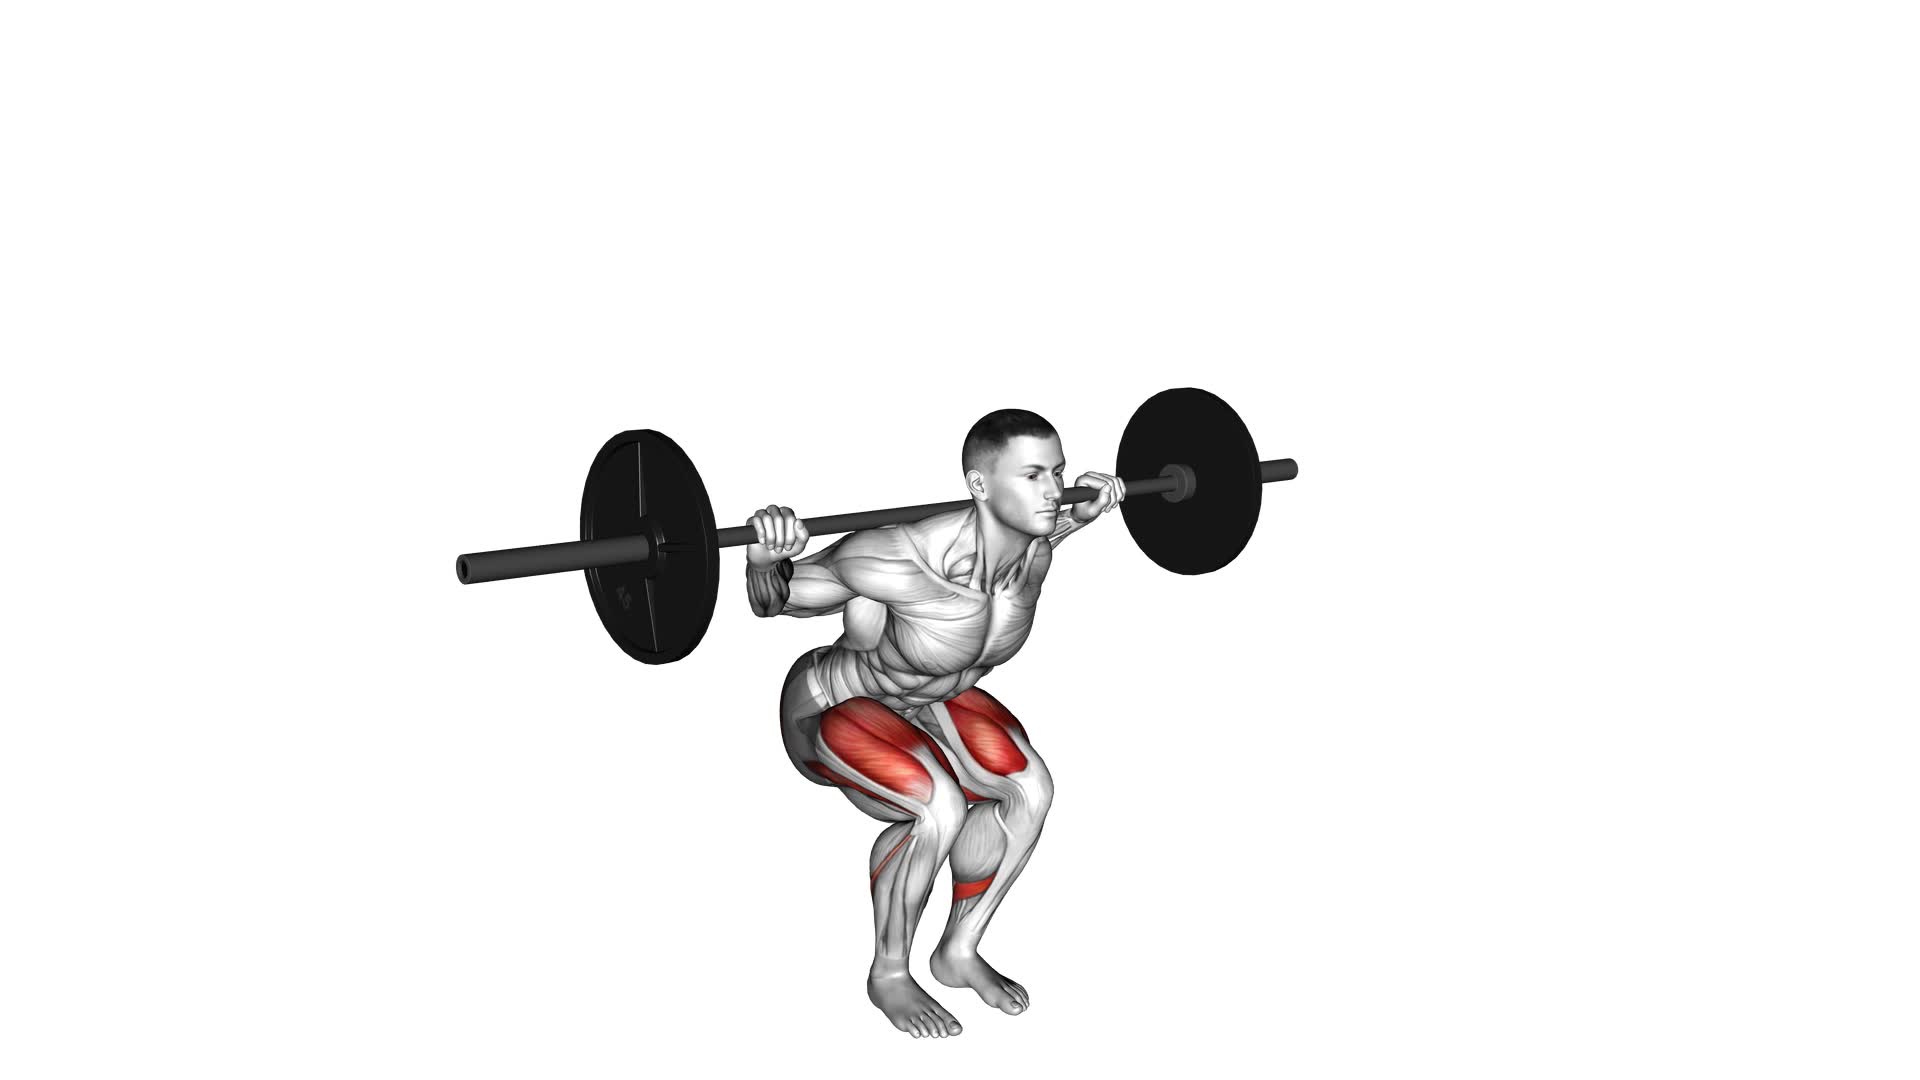 Barbell Narrow Stance Squat (male) - Video Exercise Guide & Tips